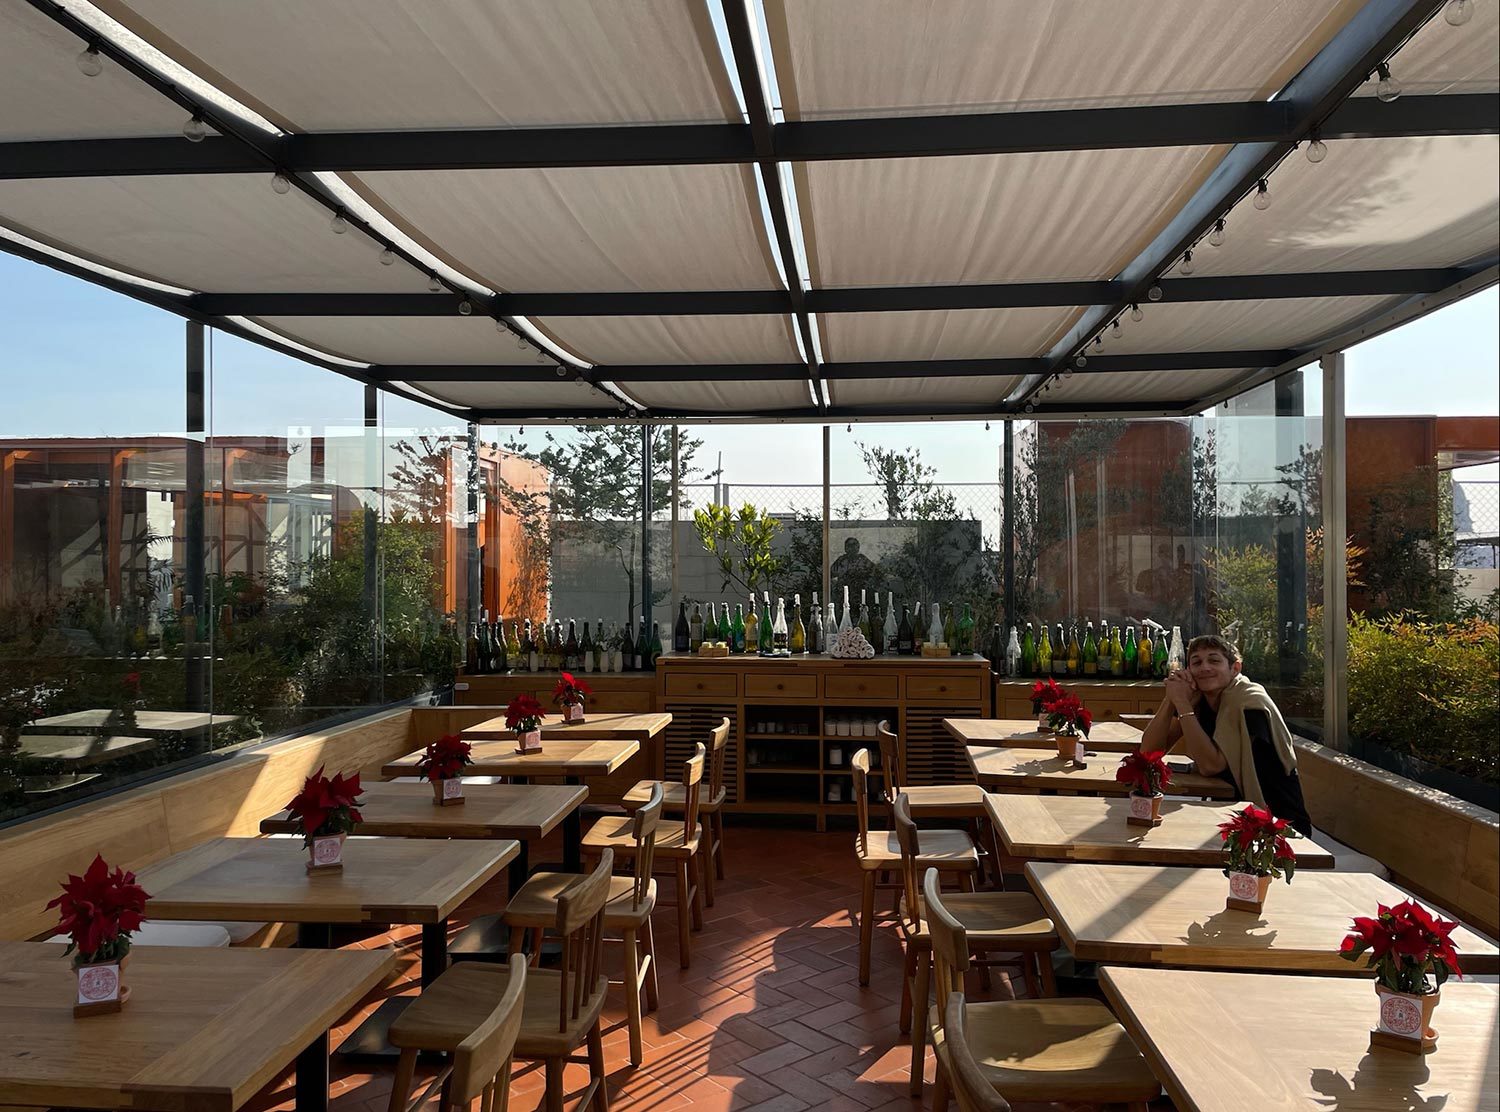 Circulo Mexicano Brooks taking in the beautiful rooftop restaurant